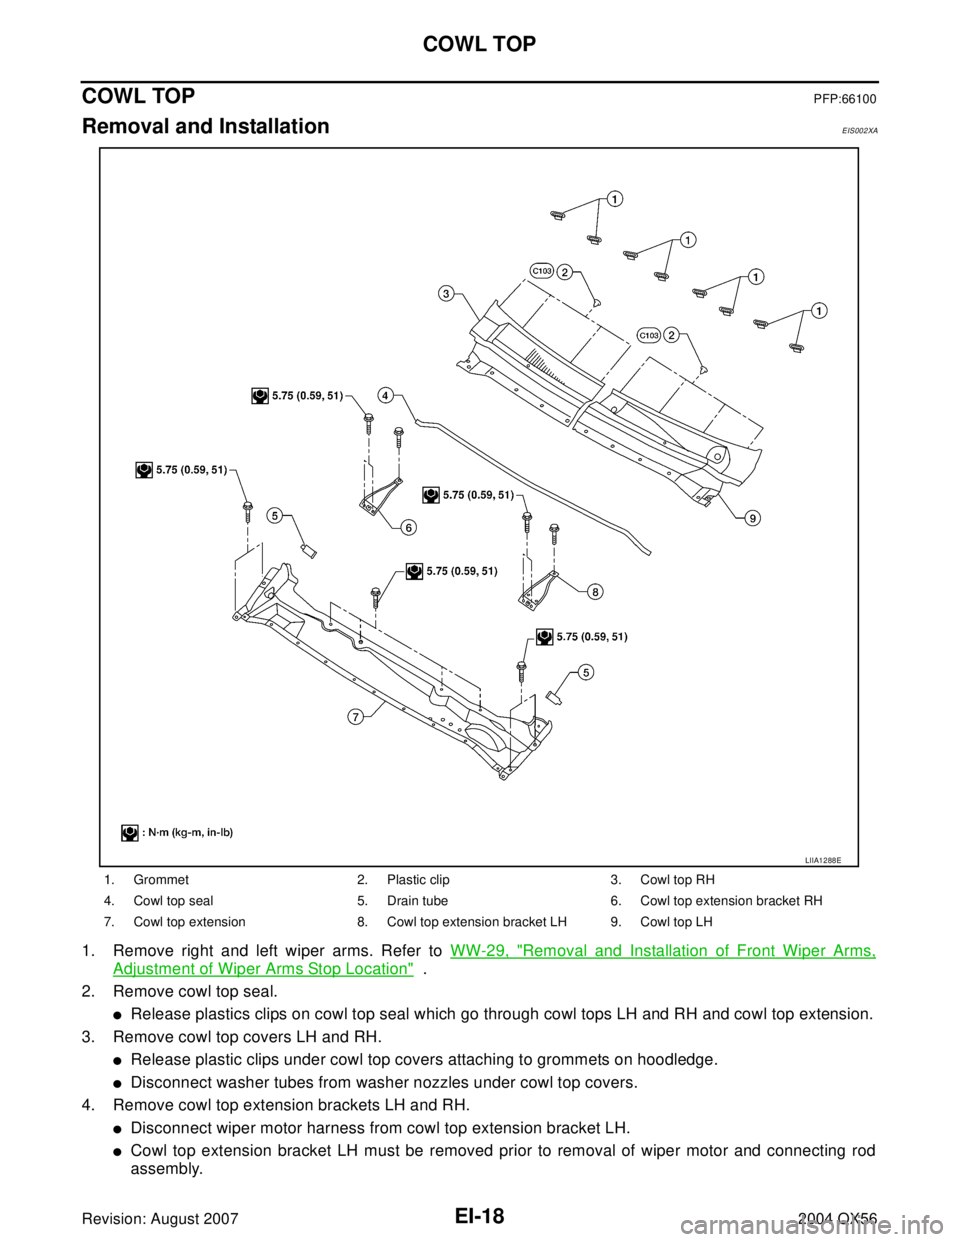 INFINITI QX56 2004  Factory Service Manual EI-18
COWL TOP
Revision: August 20072004 QX56
COWL TOPPFP:66100
Removal and InstallationEIS002XA
1. Remove right and left wiper arms. Refer to WW-29, "Removal and Installation of Front Wiper Arms,
Adj